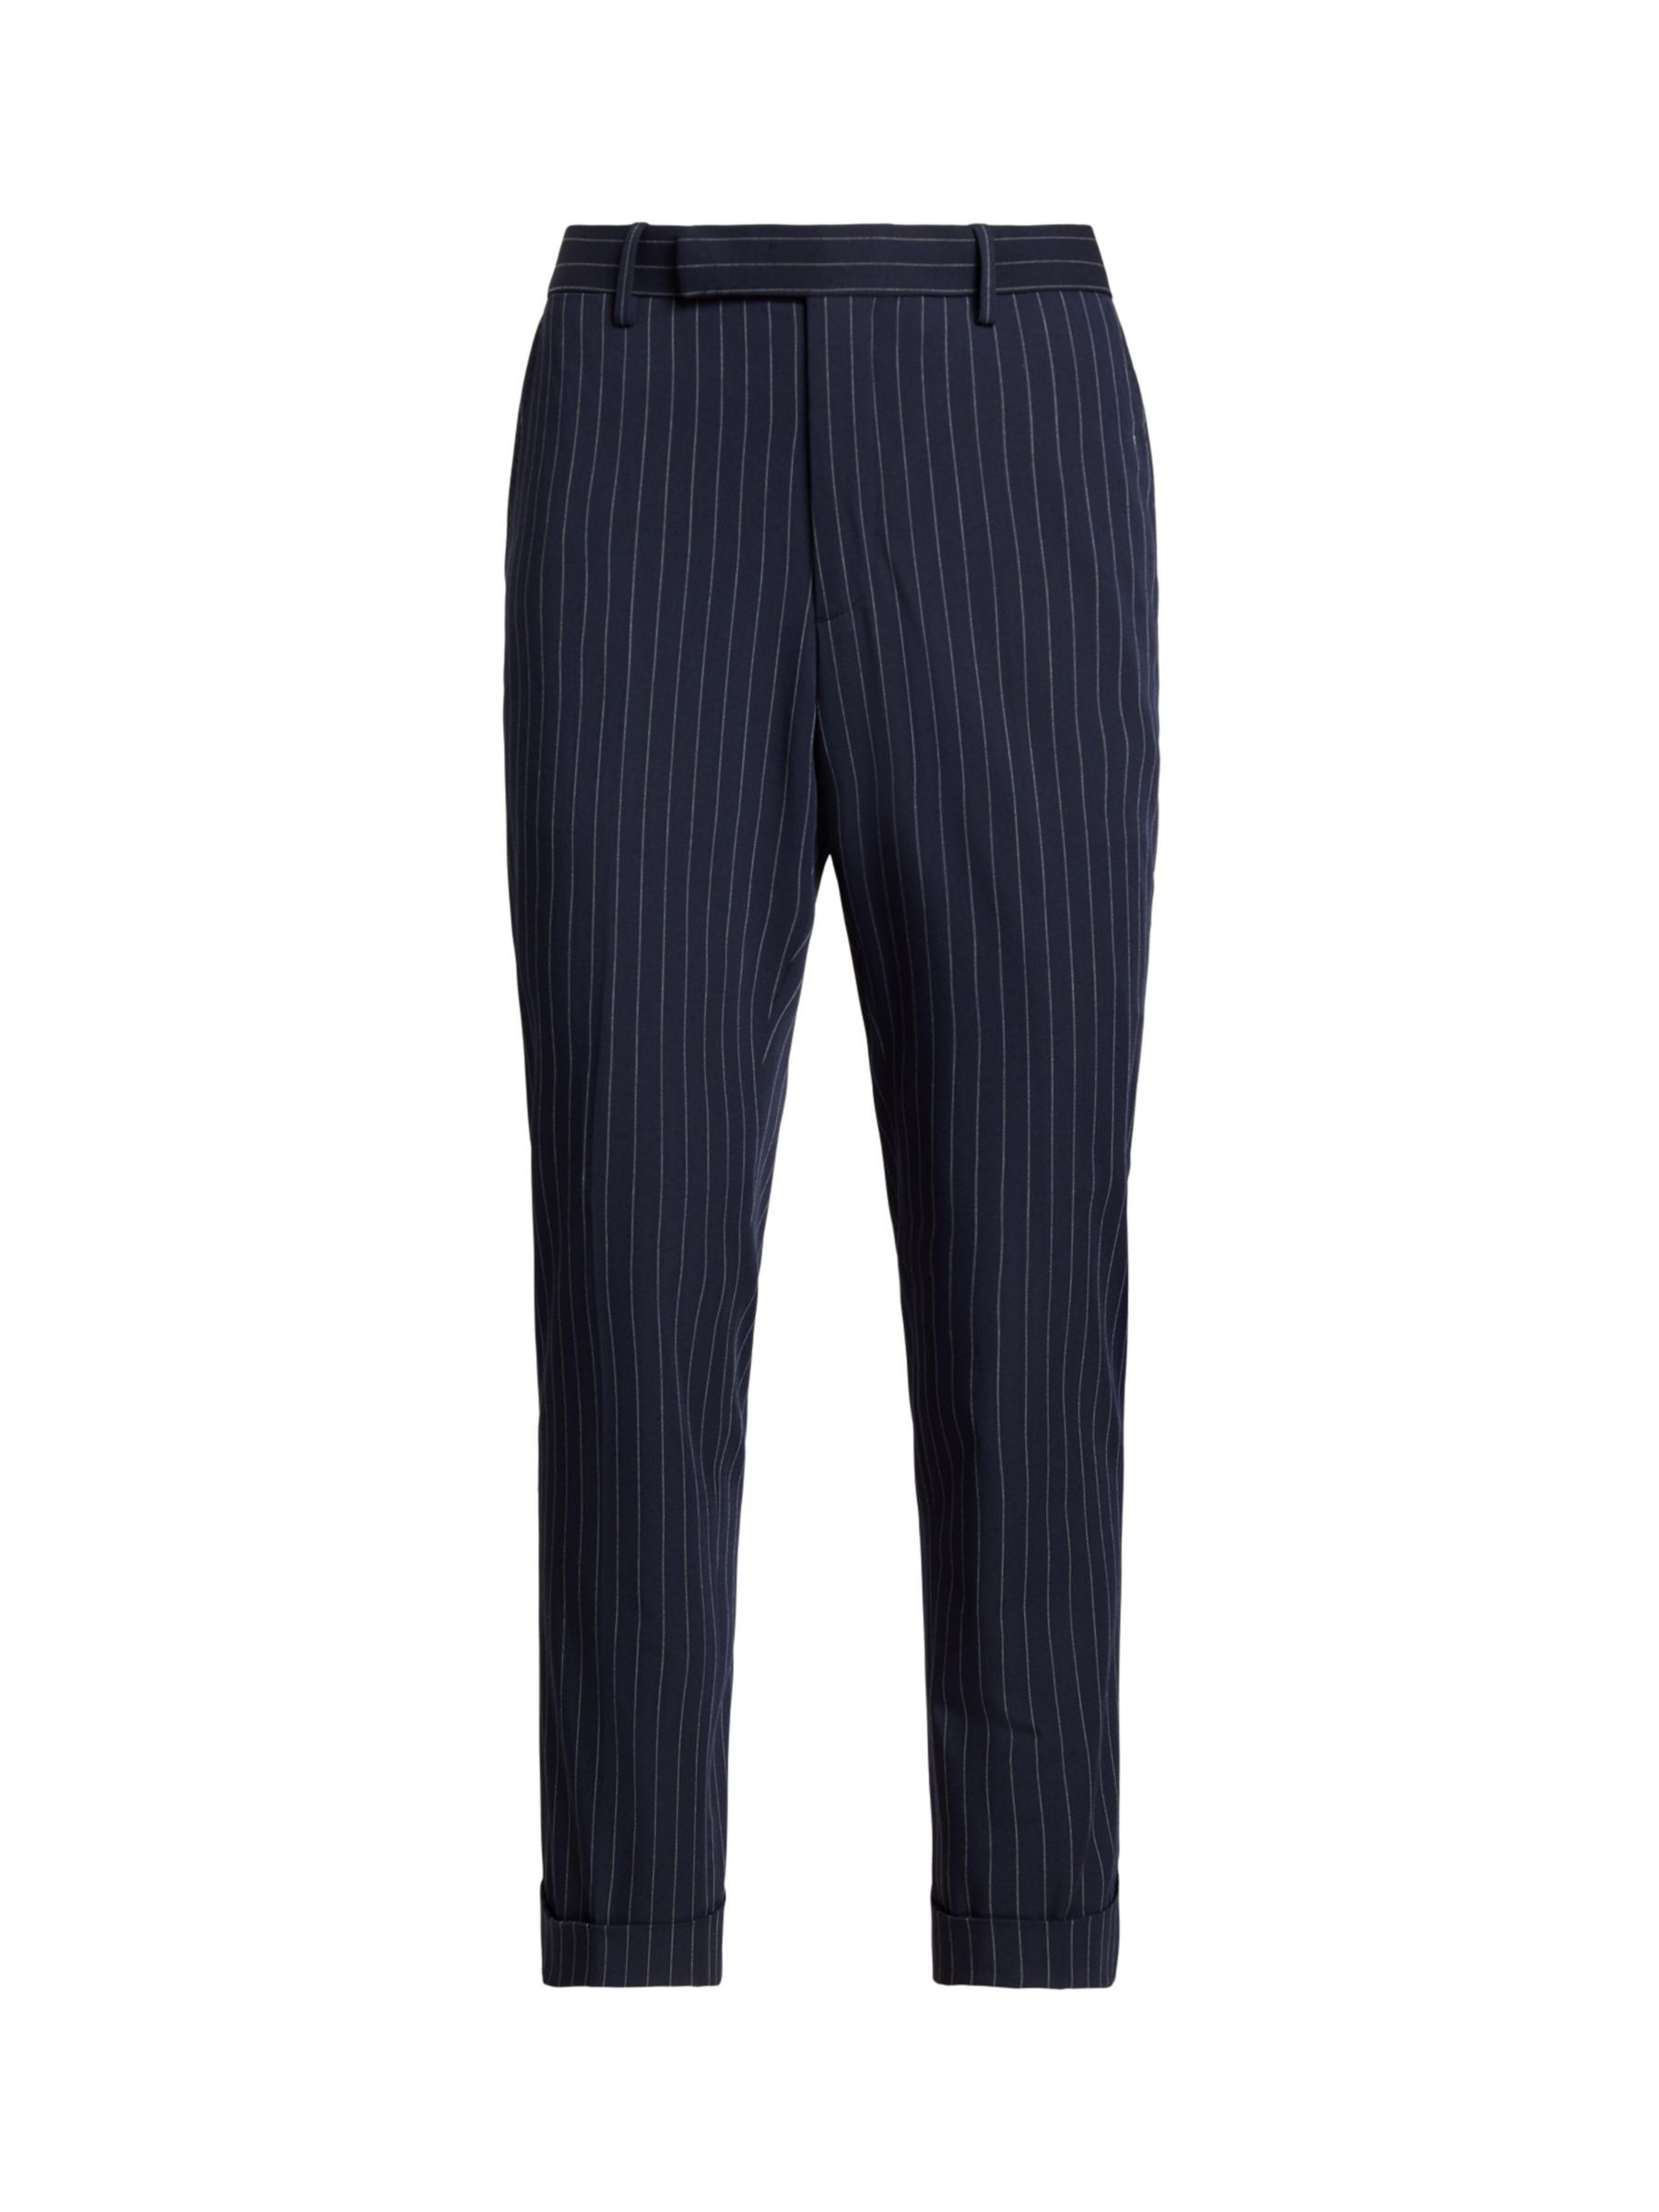 Buy Ralph Lauren Polo Ralph Lauren Chester Tailored Fit Twill Suit Trousers, Navy/Grey Online at johnlewis.com